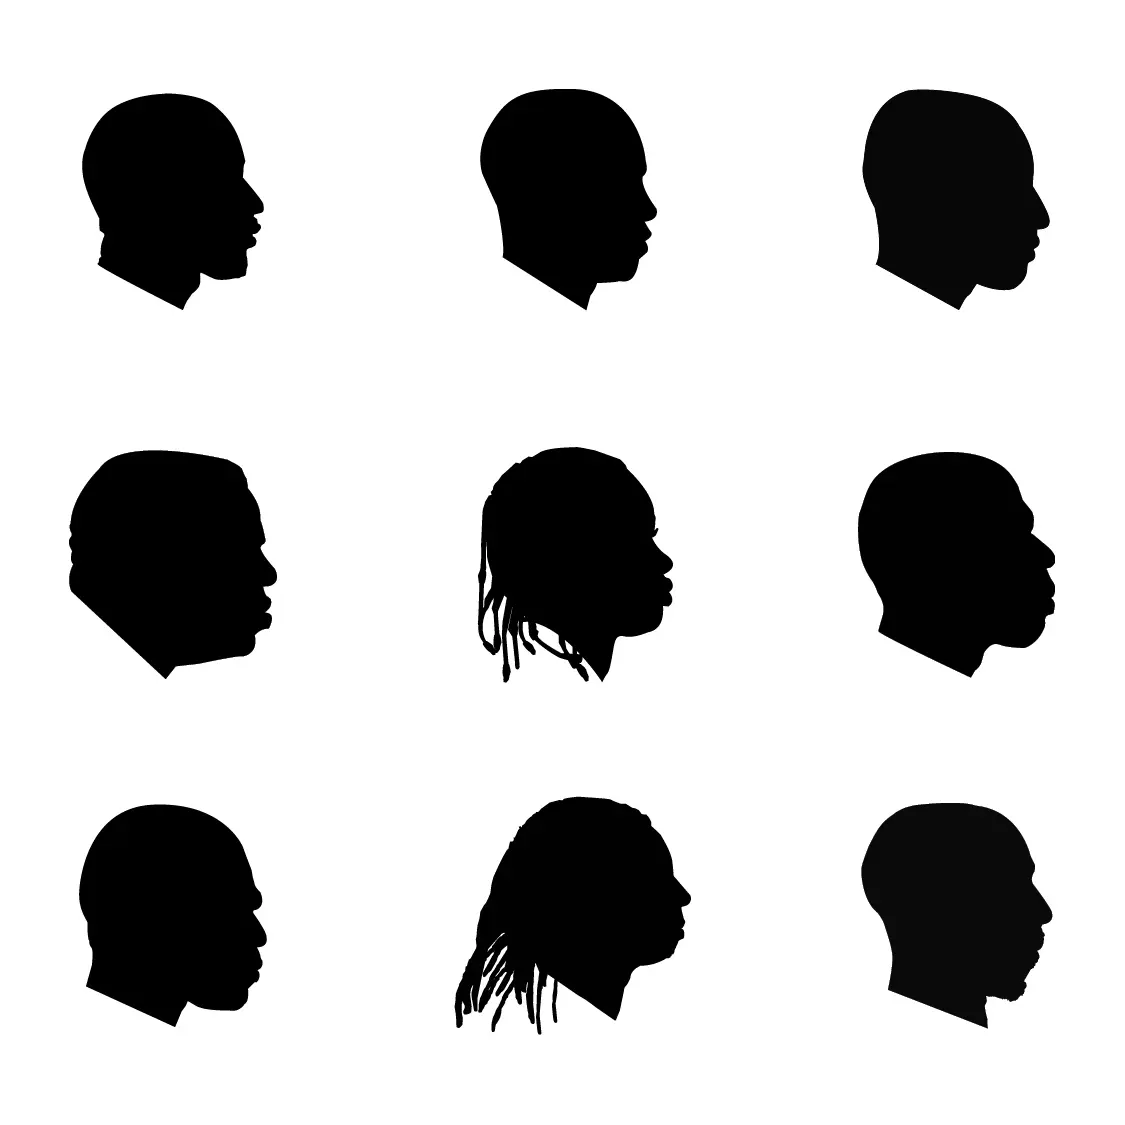 A 3x3 grid art installation of contrasting black silhouettes, each representing a unique side profile of different individuals, offering a diverse representation of faces.